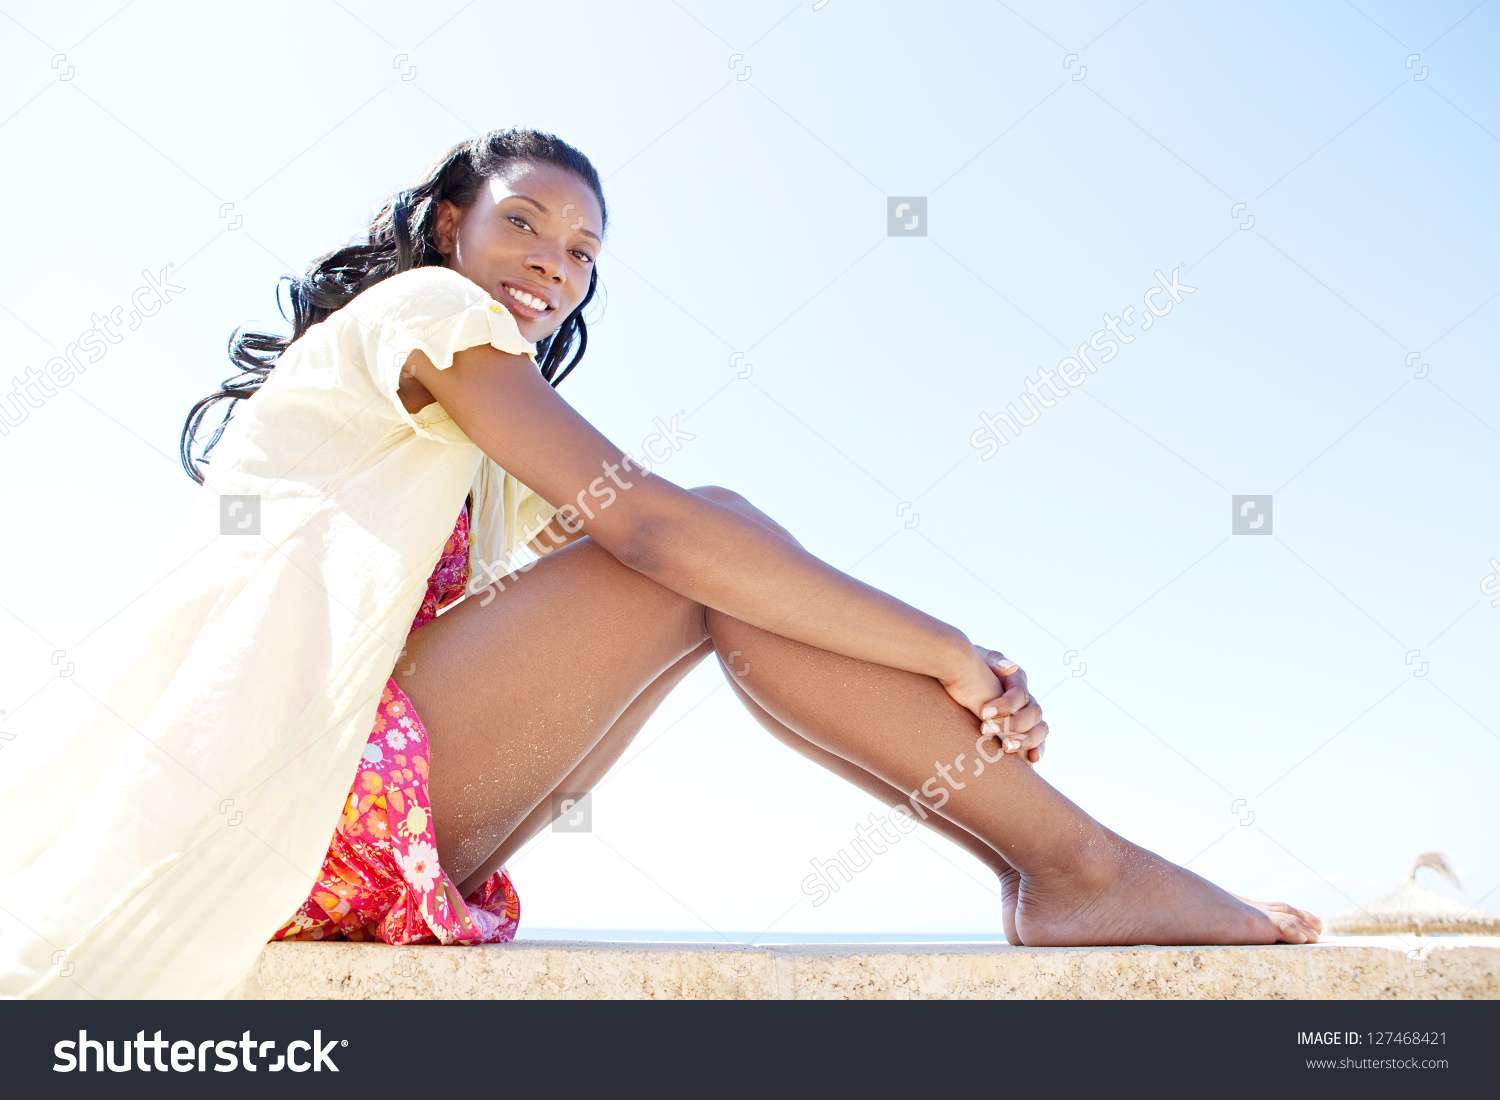 stock-photo-low-view-of-a-beautiful-and-healthy-black-woman-sitting-against-a-bright-blue-sky-on-a-sunny-beach-127468421